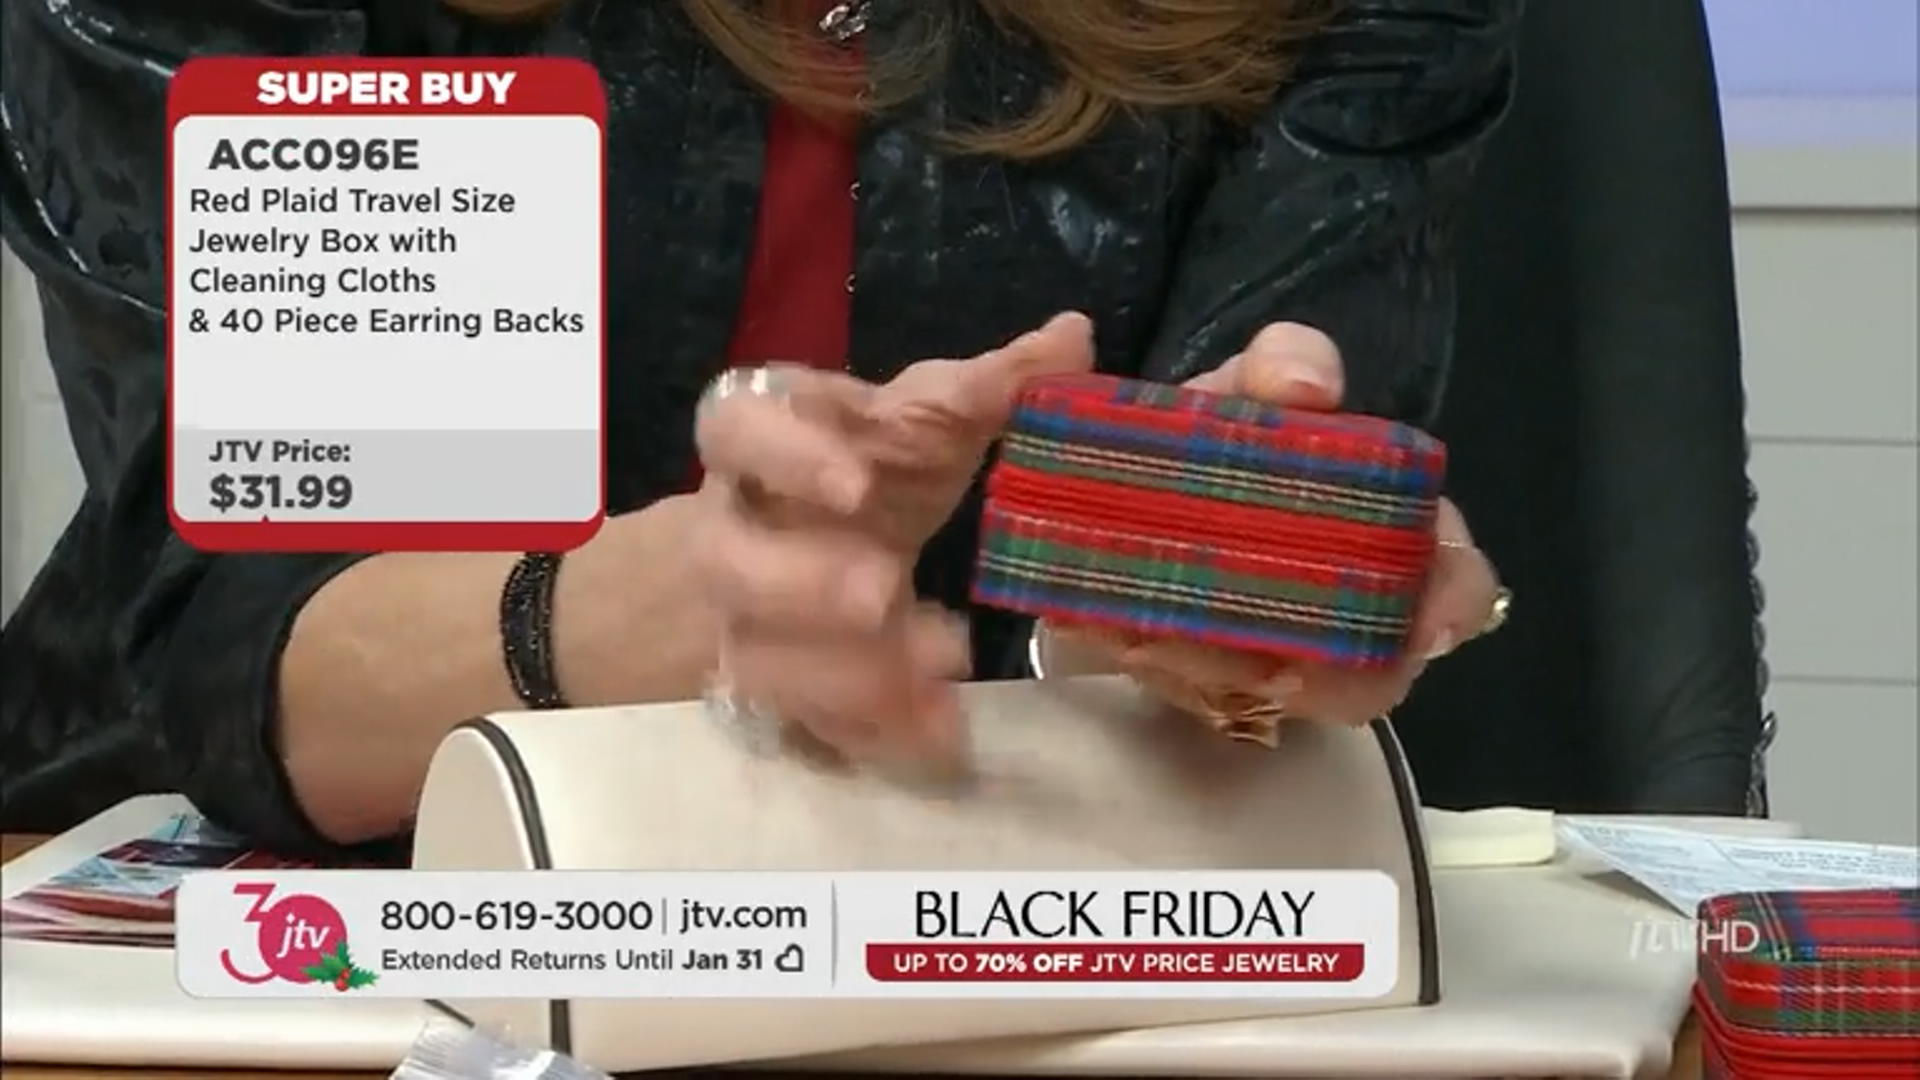 Red Plaid Travel Size Jewelry Box with Cleaning Cloths & 40 Piece Earring Backs Video Thumbnail